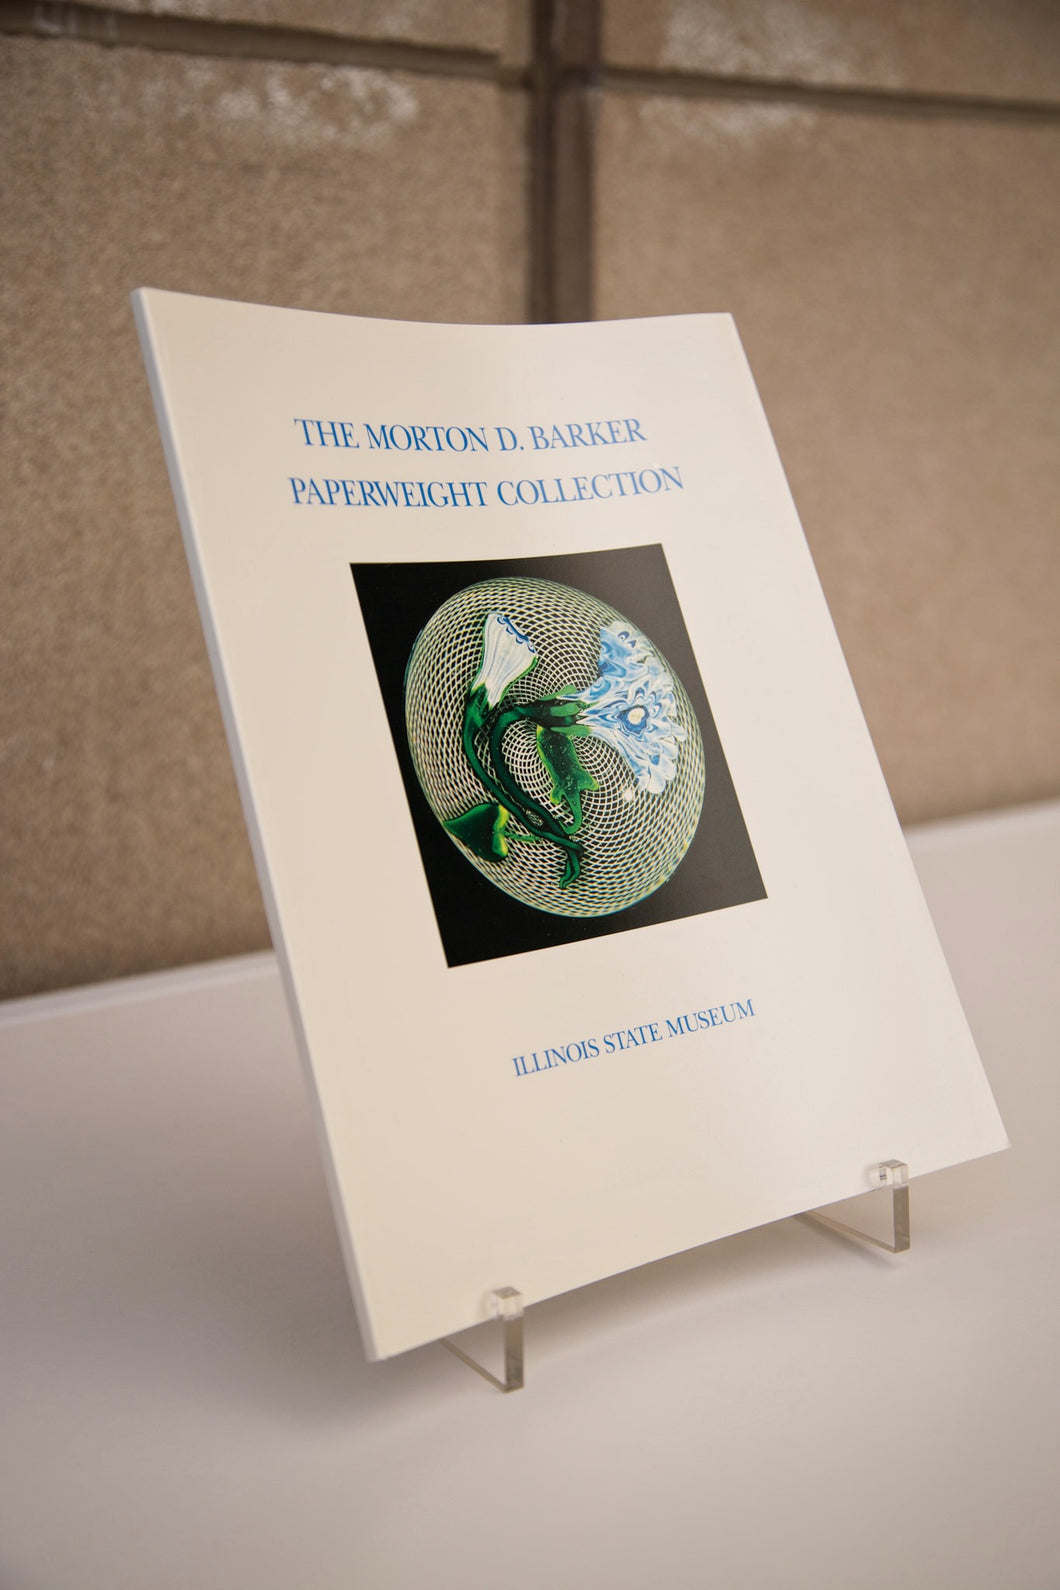 Image of the cover of the book “The Moron D. Barker Paperweight Collection”.